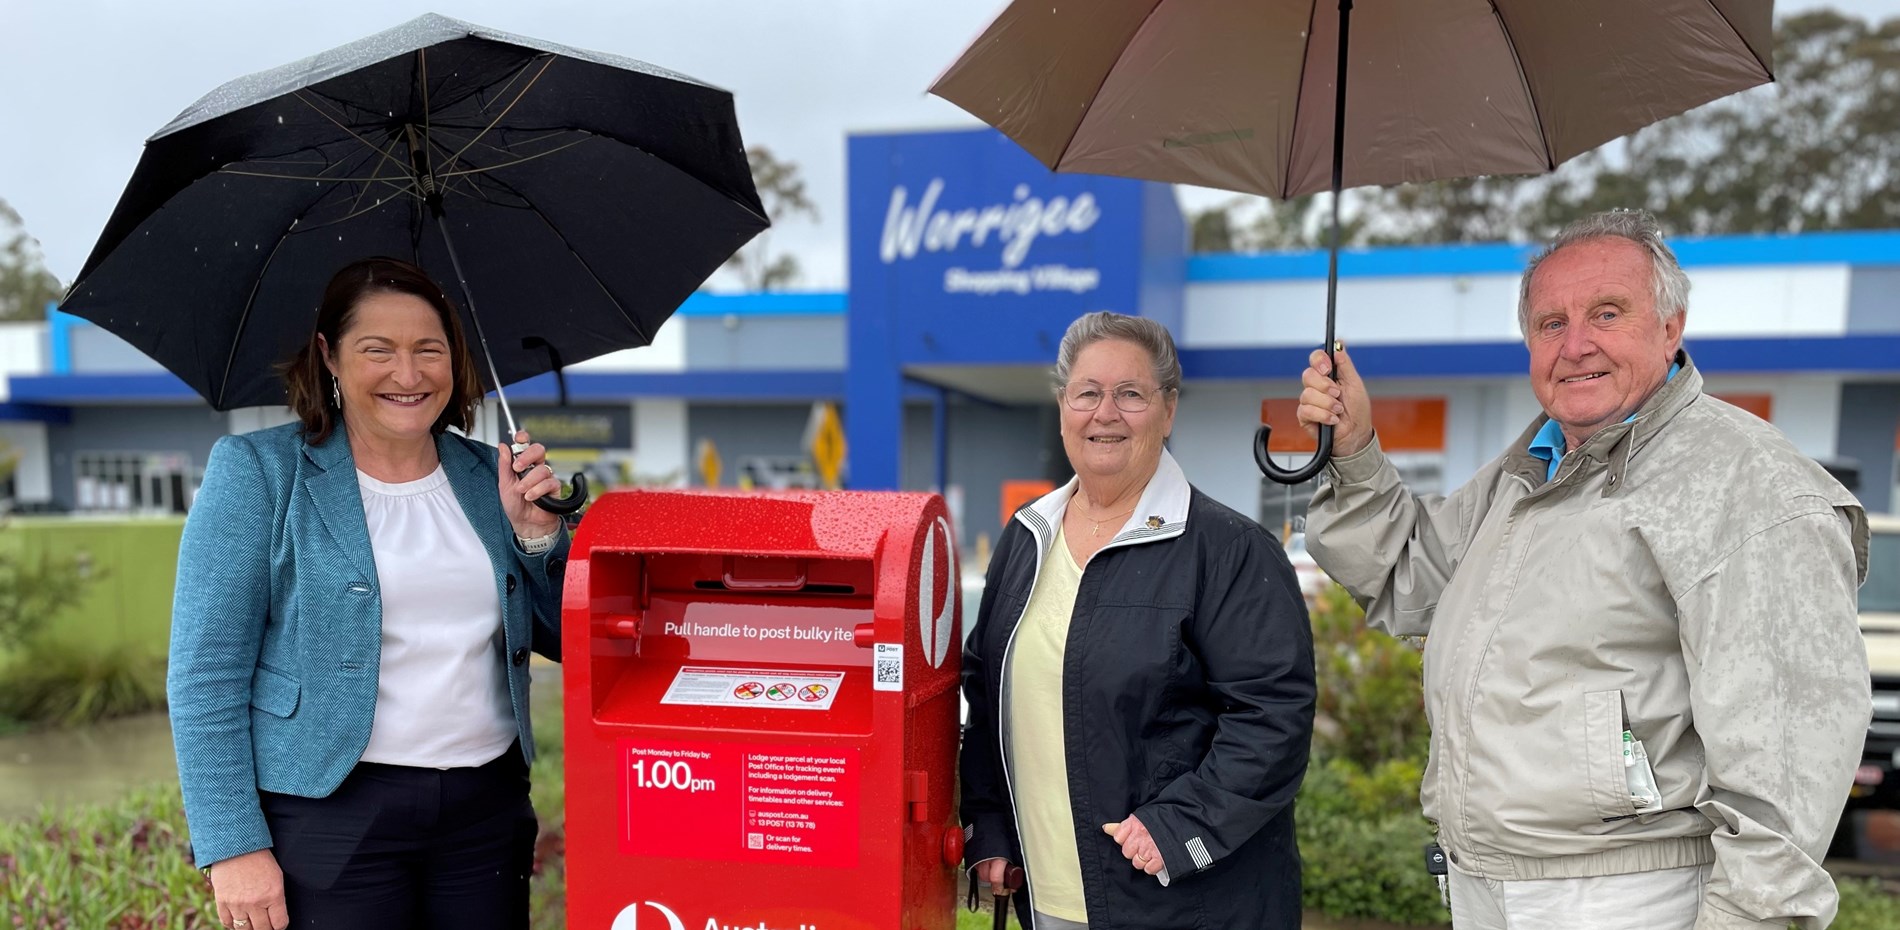 Media release: Red mailbox at the end of Worrigee local’s rainbow Main Image